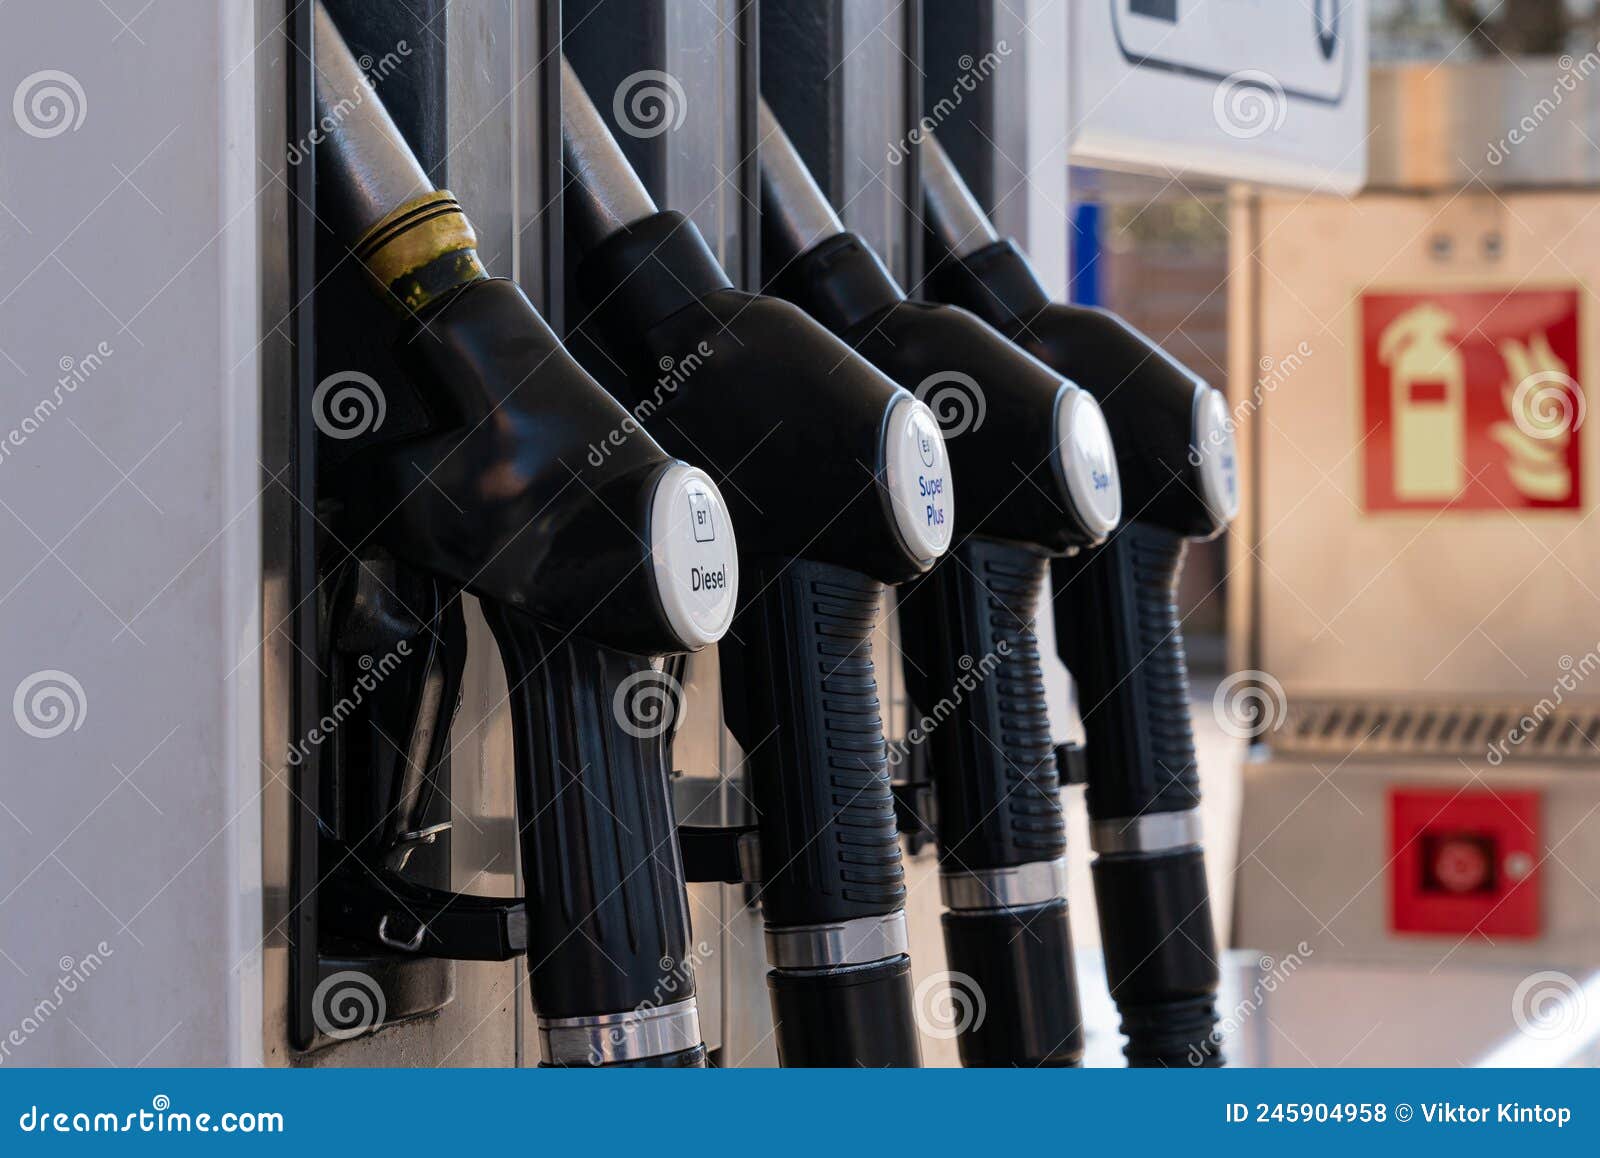 a gas pump nozzles at a gas station